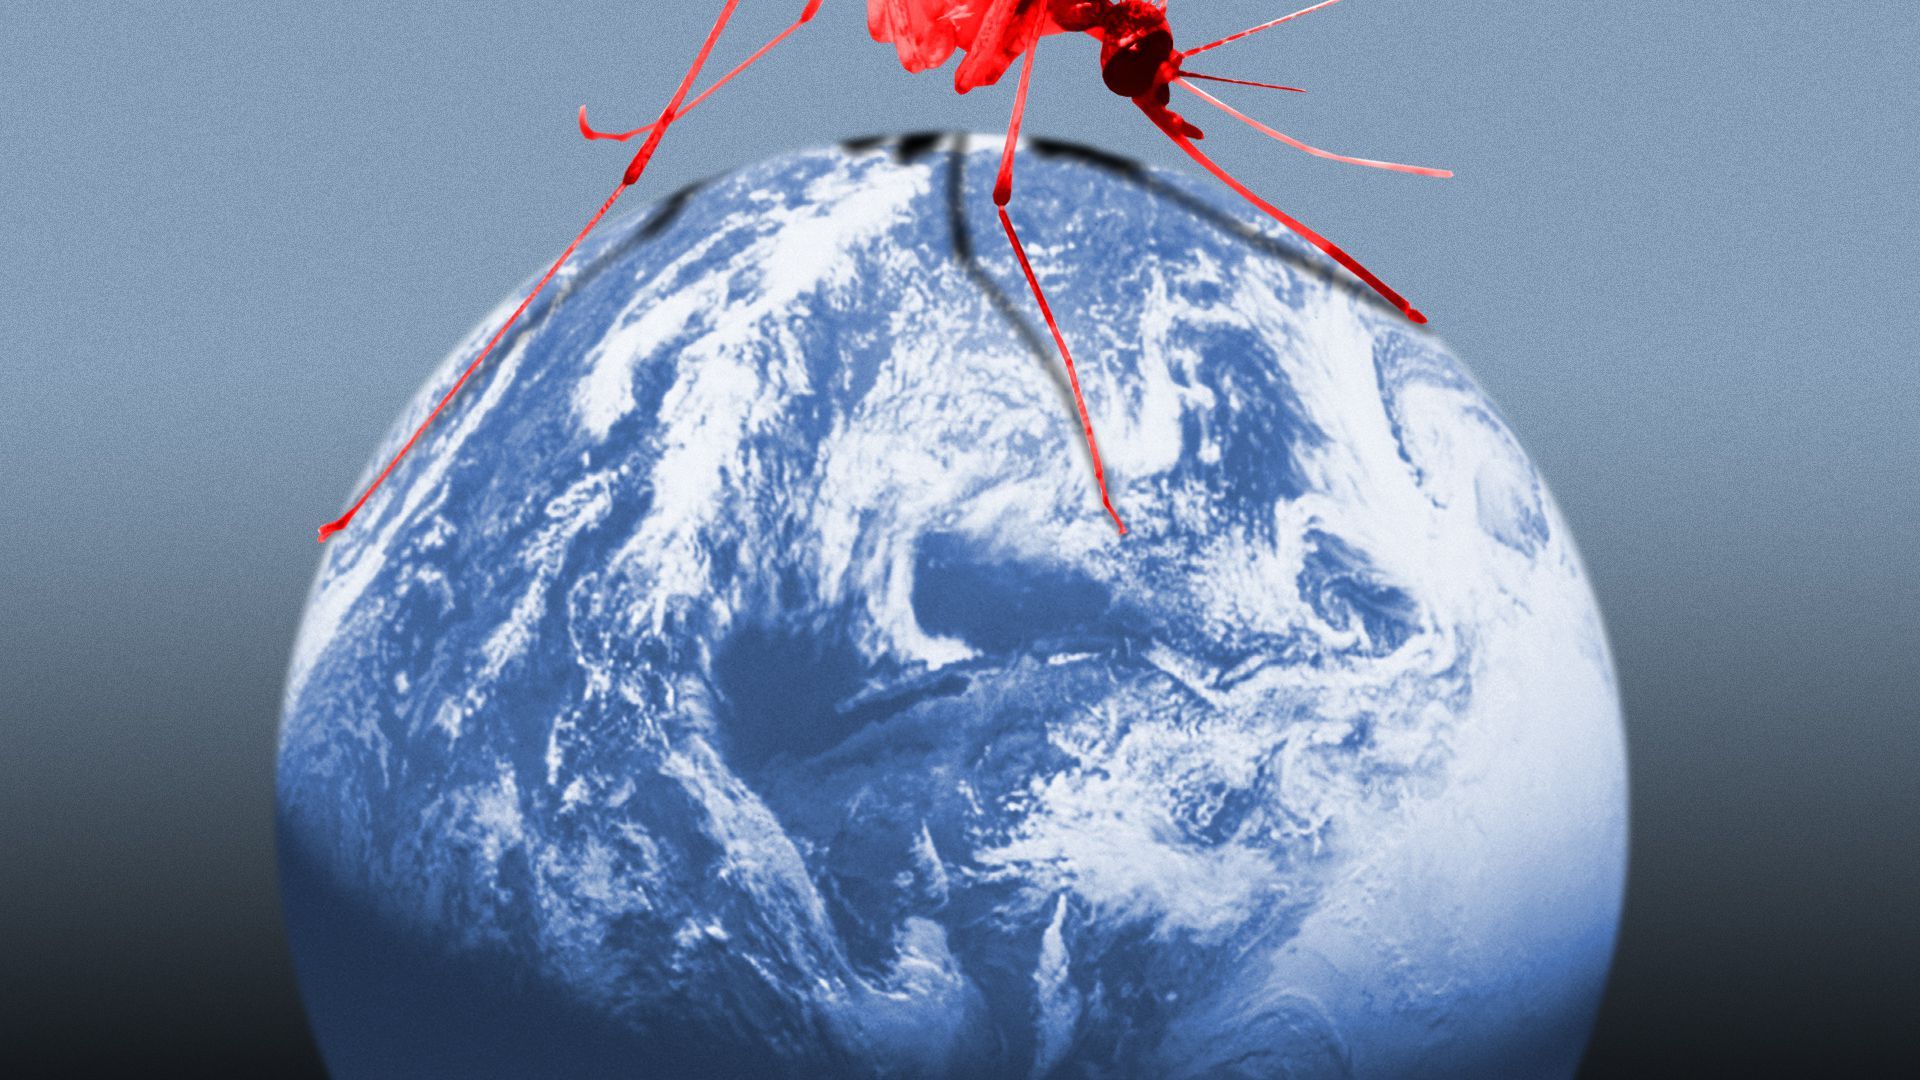 Illustration of a giant mosquito perched on a small Earth